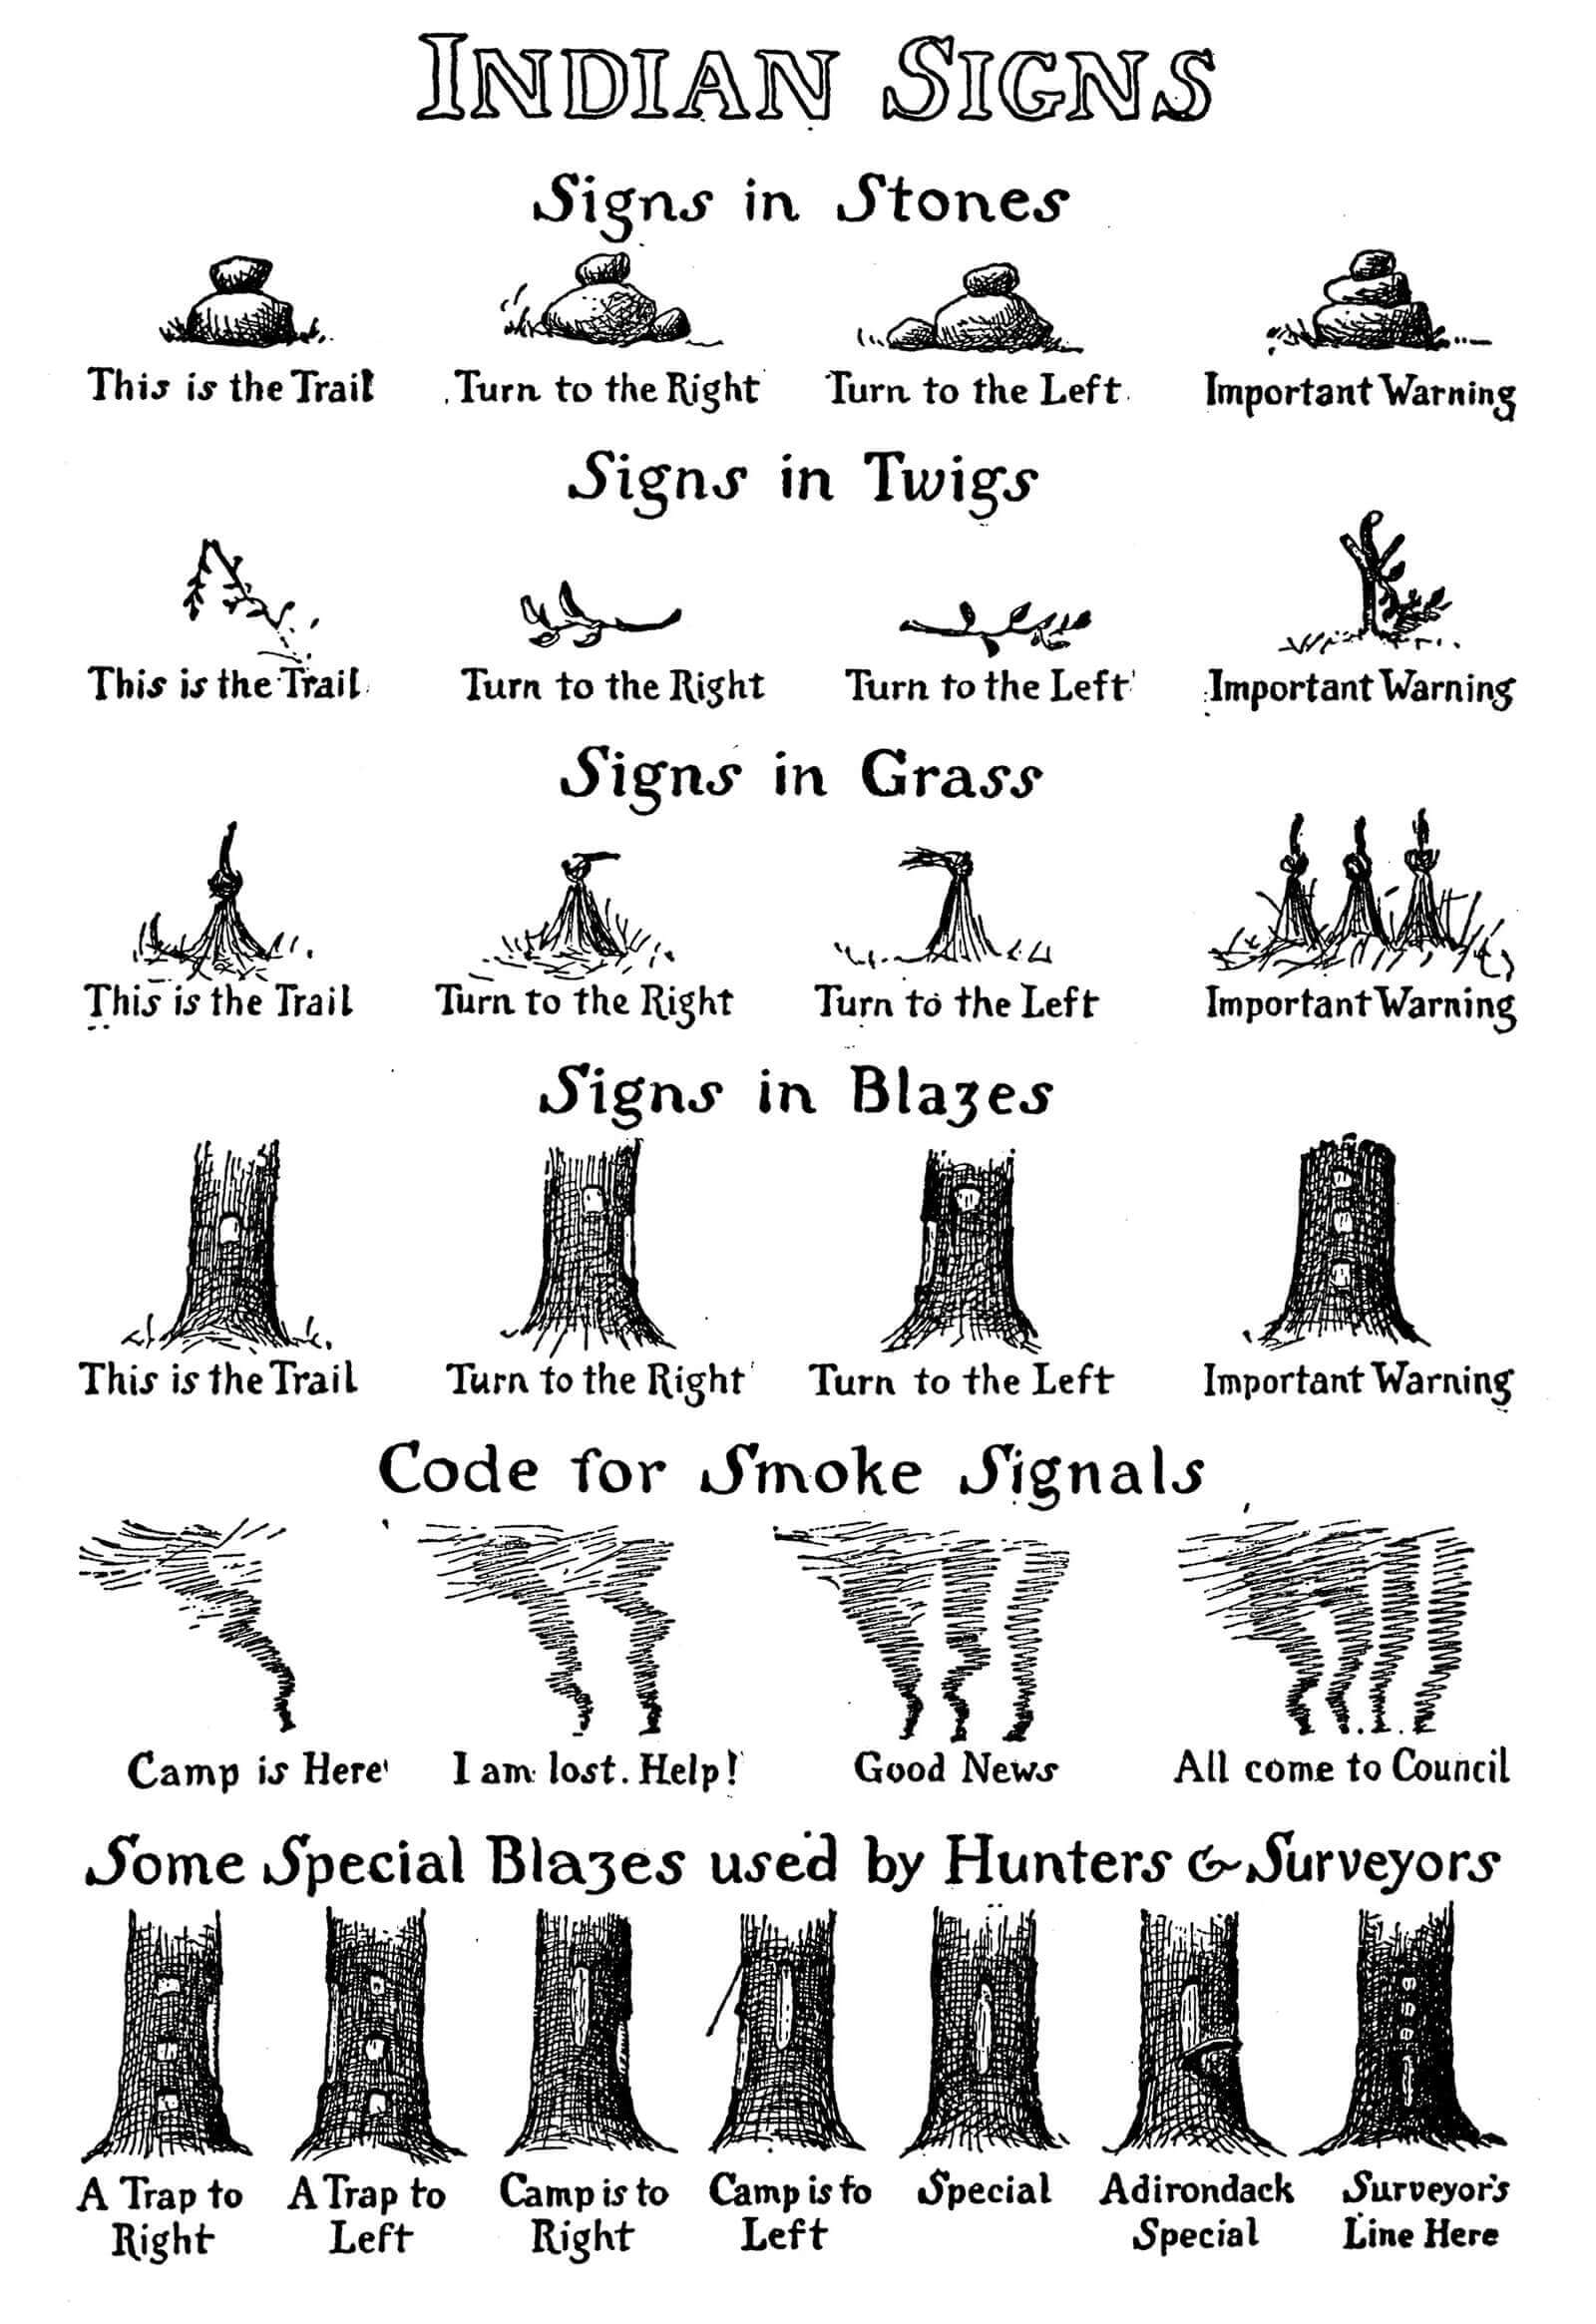 A chart of from Ernest Thompson Seton’s nineteen twelve Book of Woodcraft and Indian Lore depicting what he called “Indian Signs.”